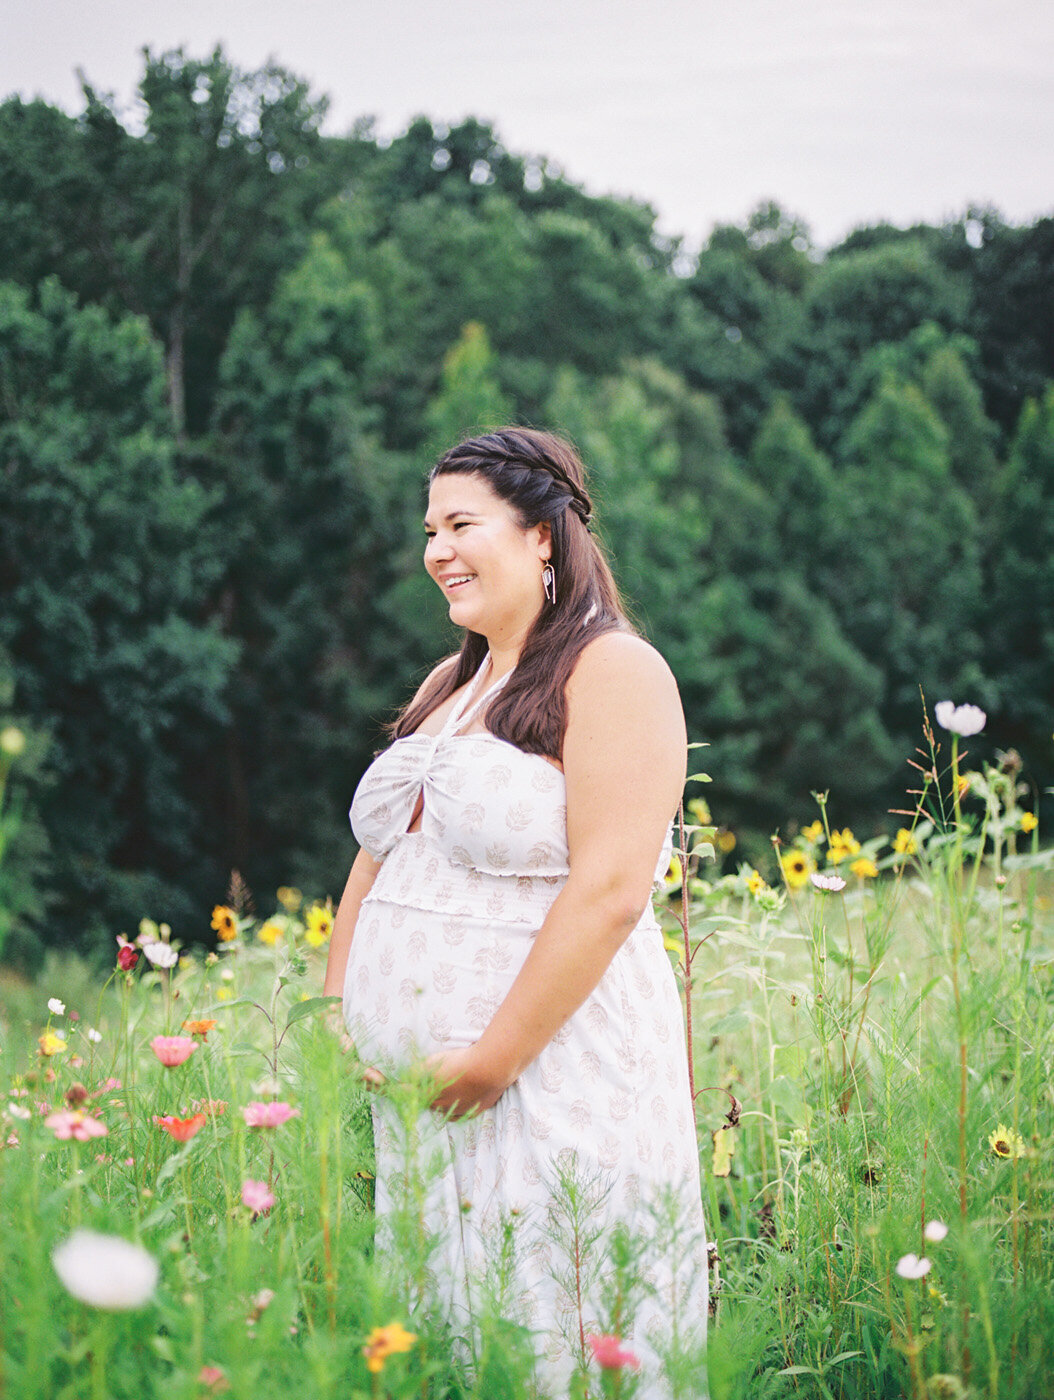 Raleigh Maternity Photographer | Jessica Agee Photography - 017